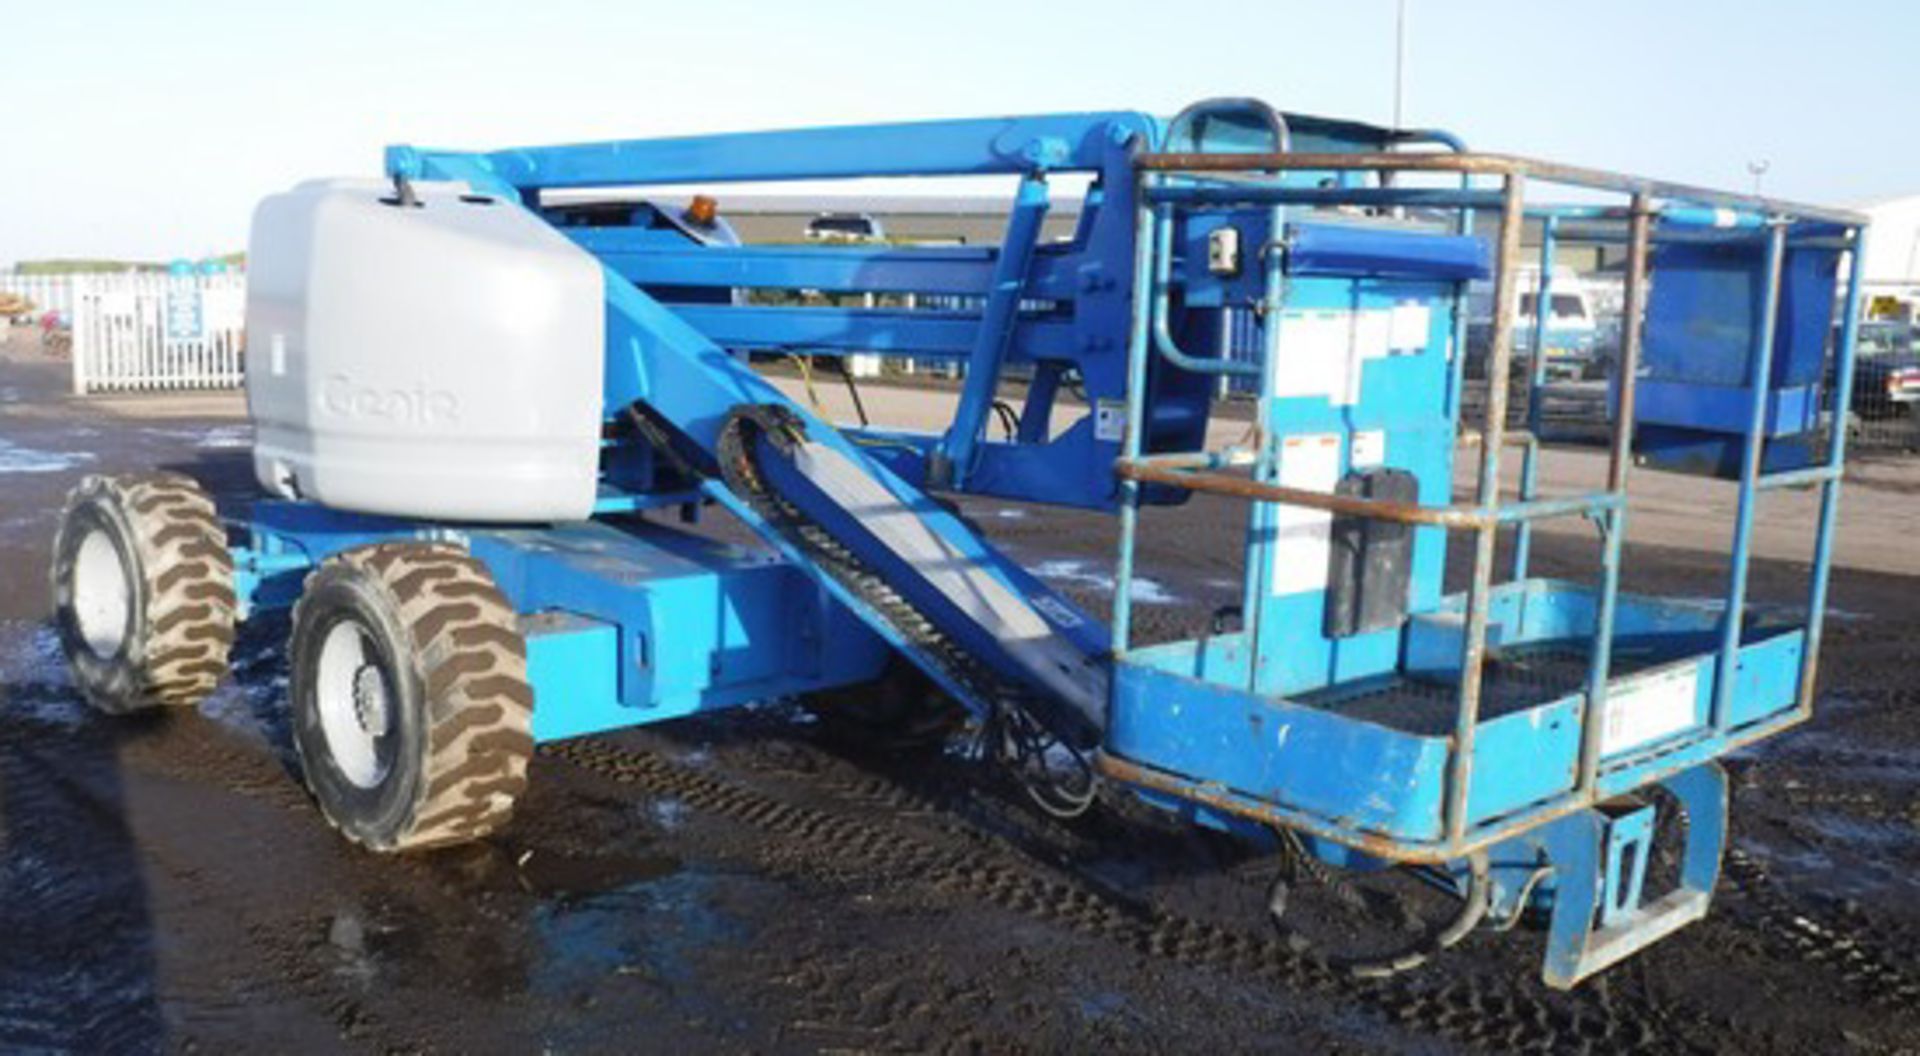 2000 GENIE MODEL Z45-25, S/N 15155, 8046HRS (NOT VERIFIED), LIFT CAPACITY - 230 - Image 12 of 17